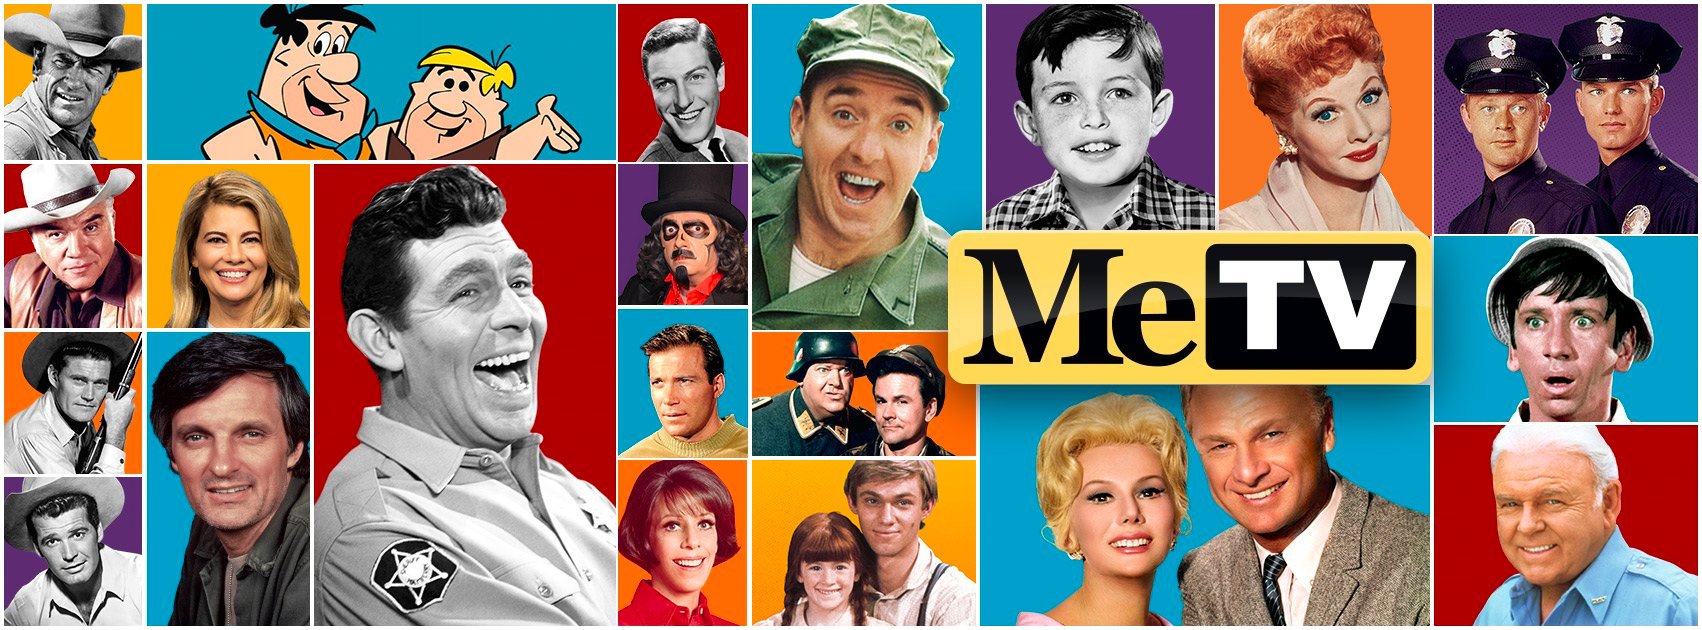 metv cable shows 